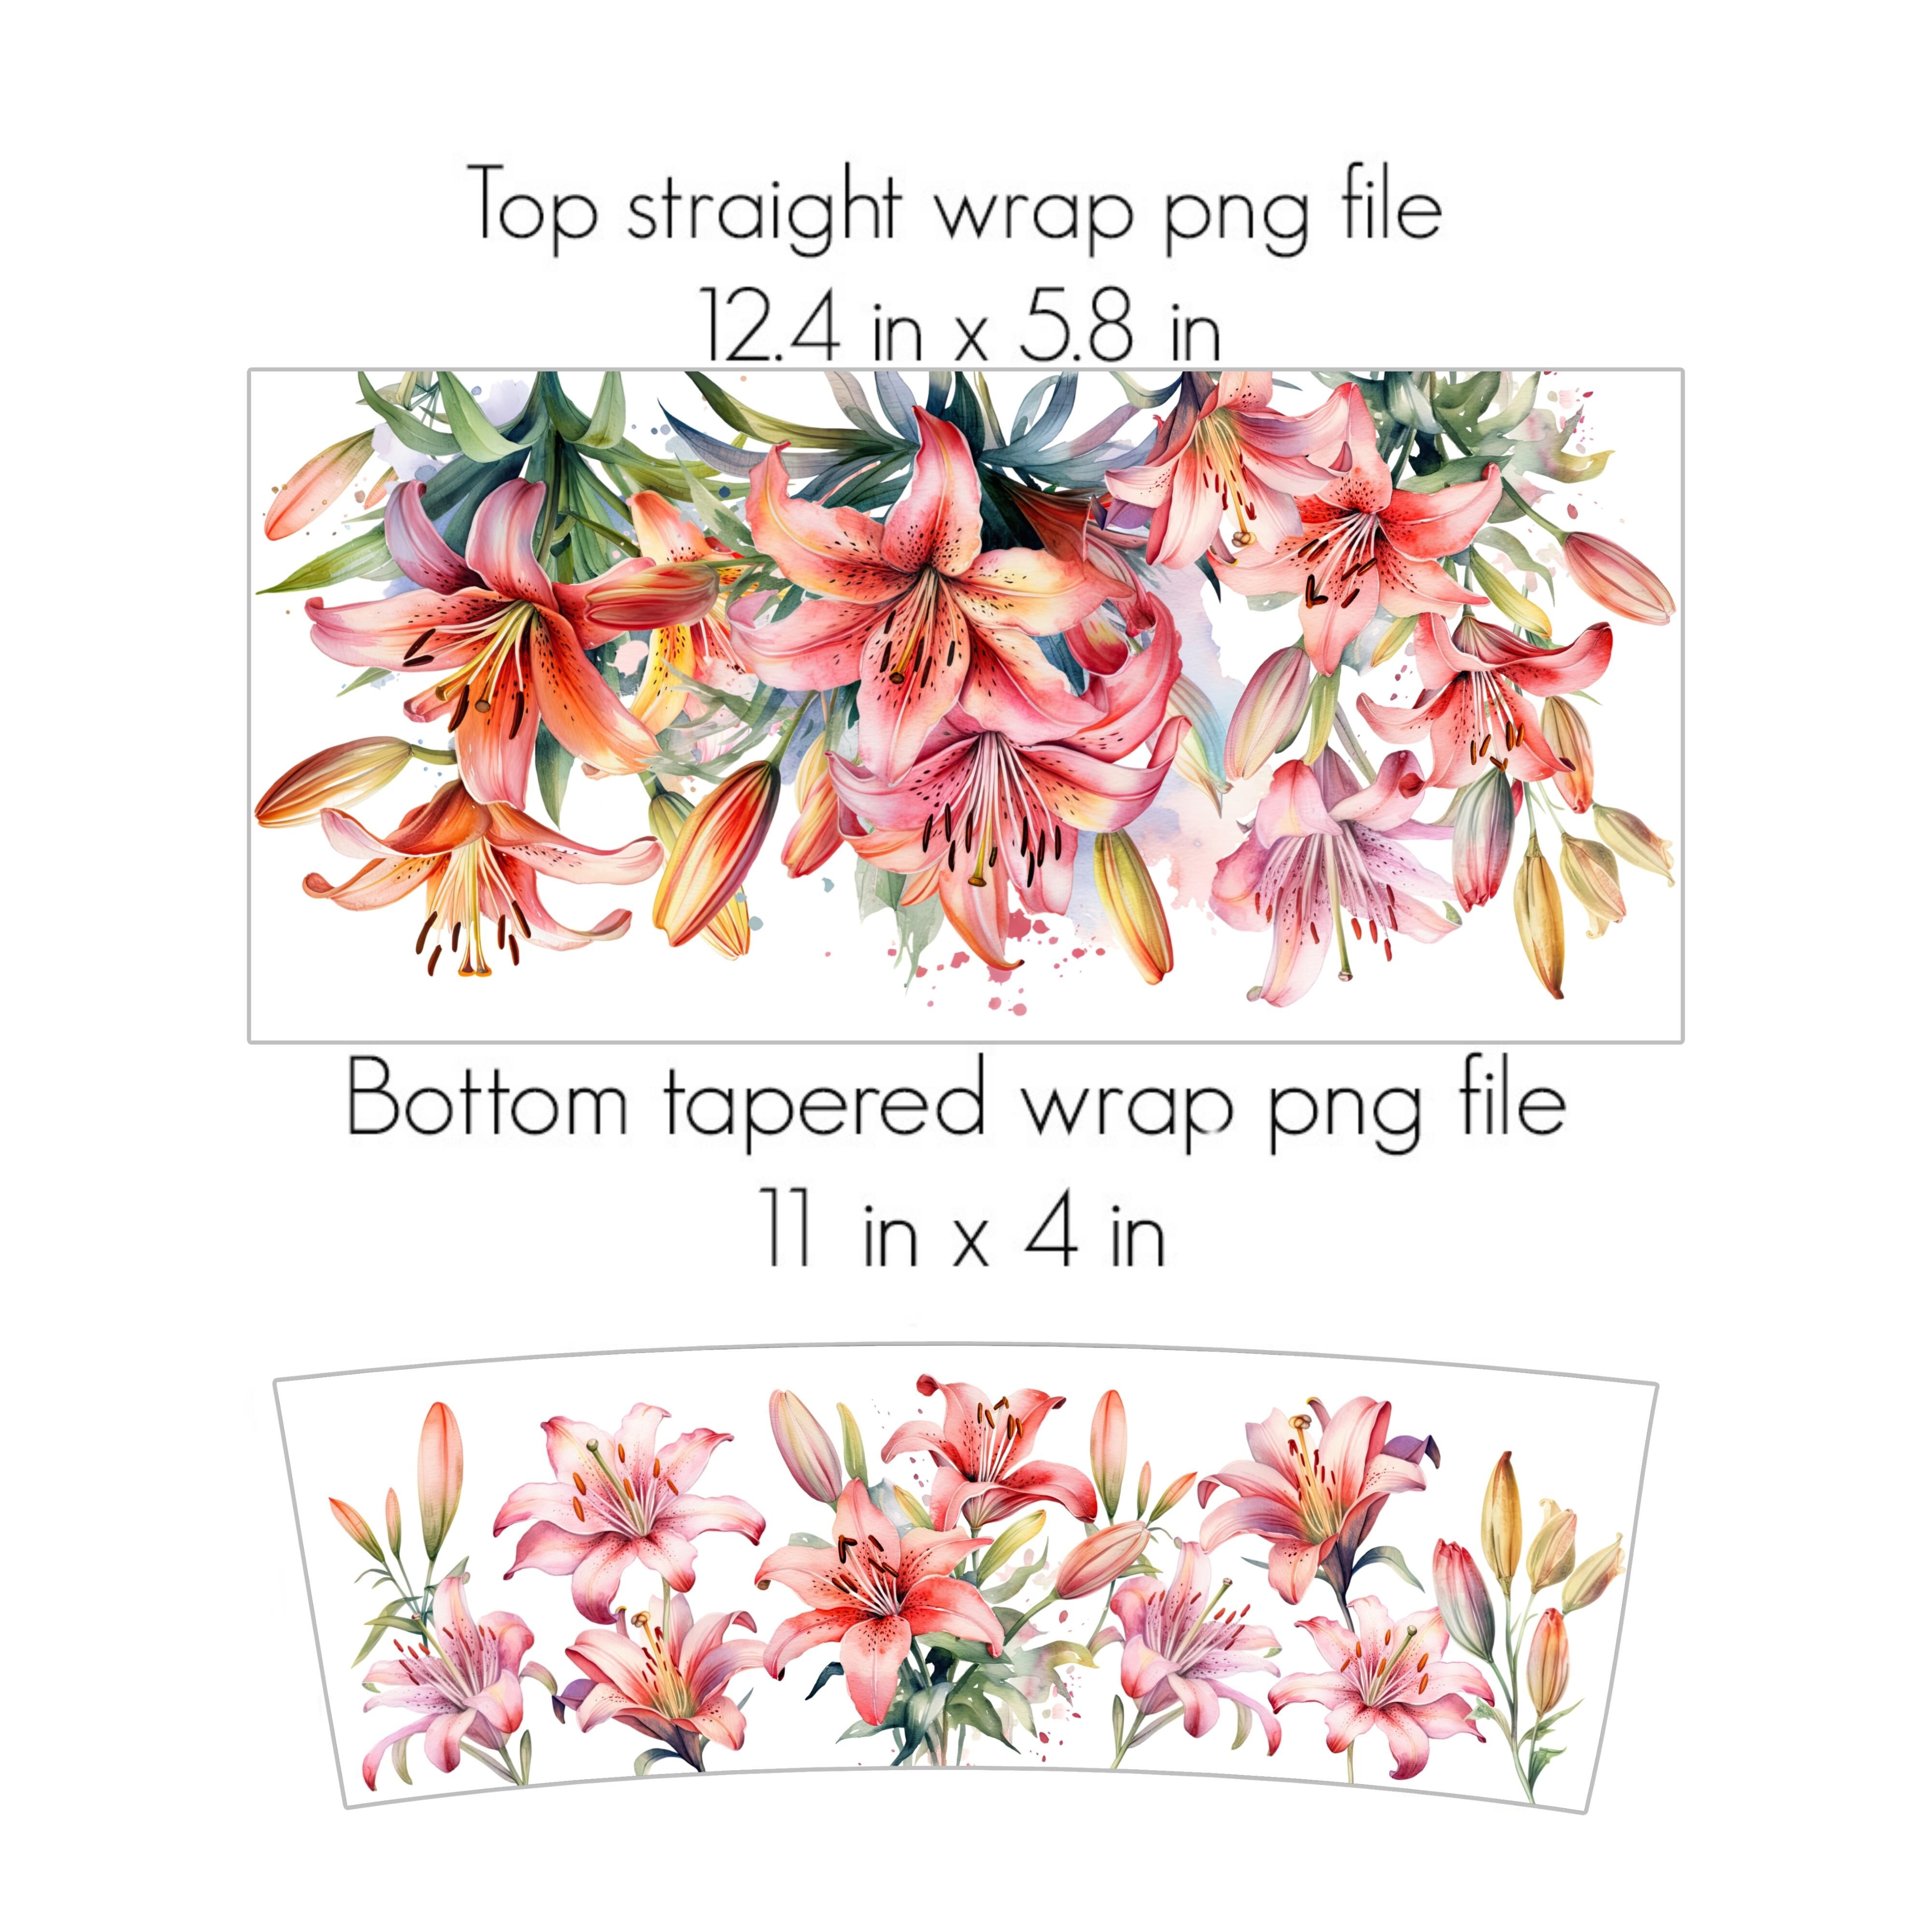 Dottie Digitals - Lily Flowers 20 Oz Straight Tumbler Wrap SVG PNG Dxf -  Floral Pattern Flowers HOGG Built Makerflo Straight Duo Sublimation Tumbler  Template